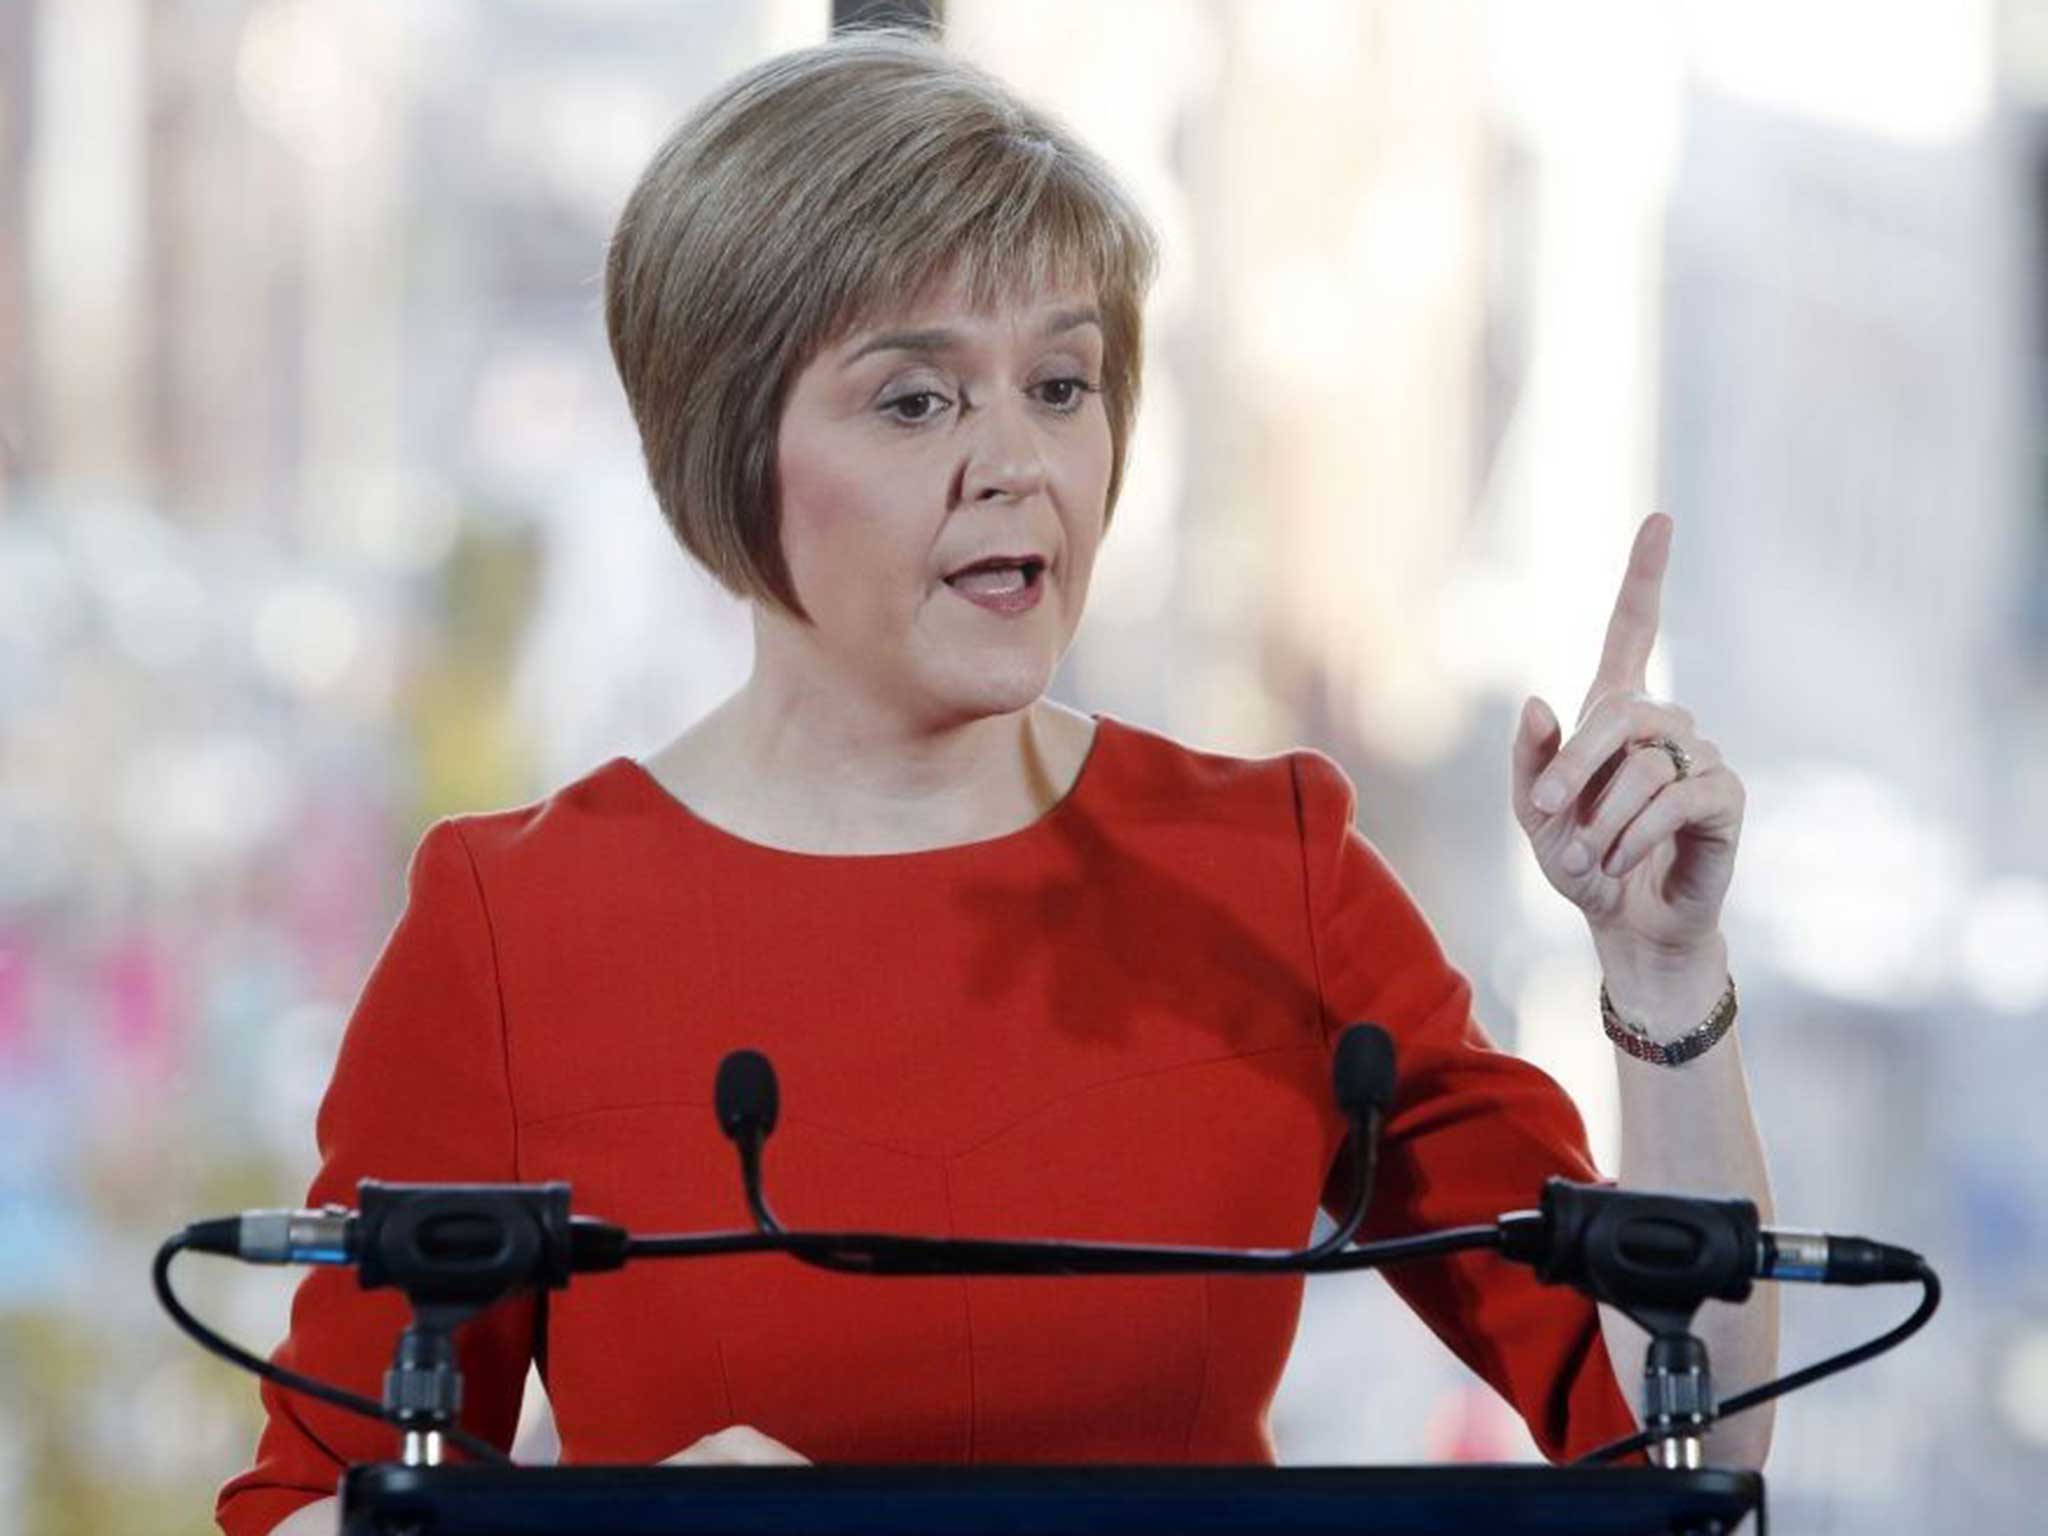 Nicola Sturgeon is a very likely to become Scotland's new First Minister